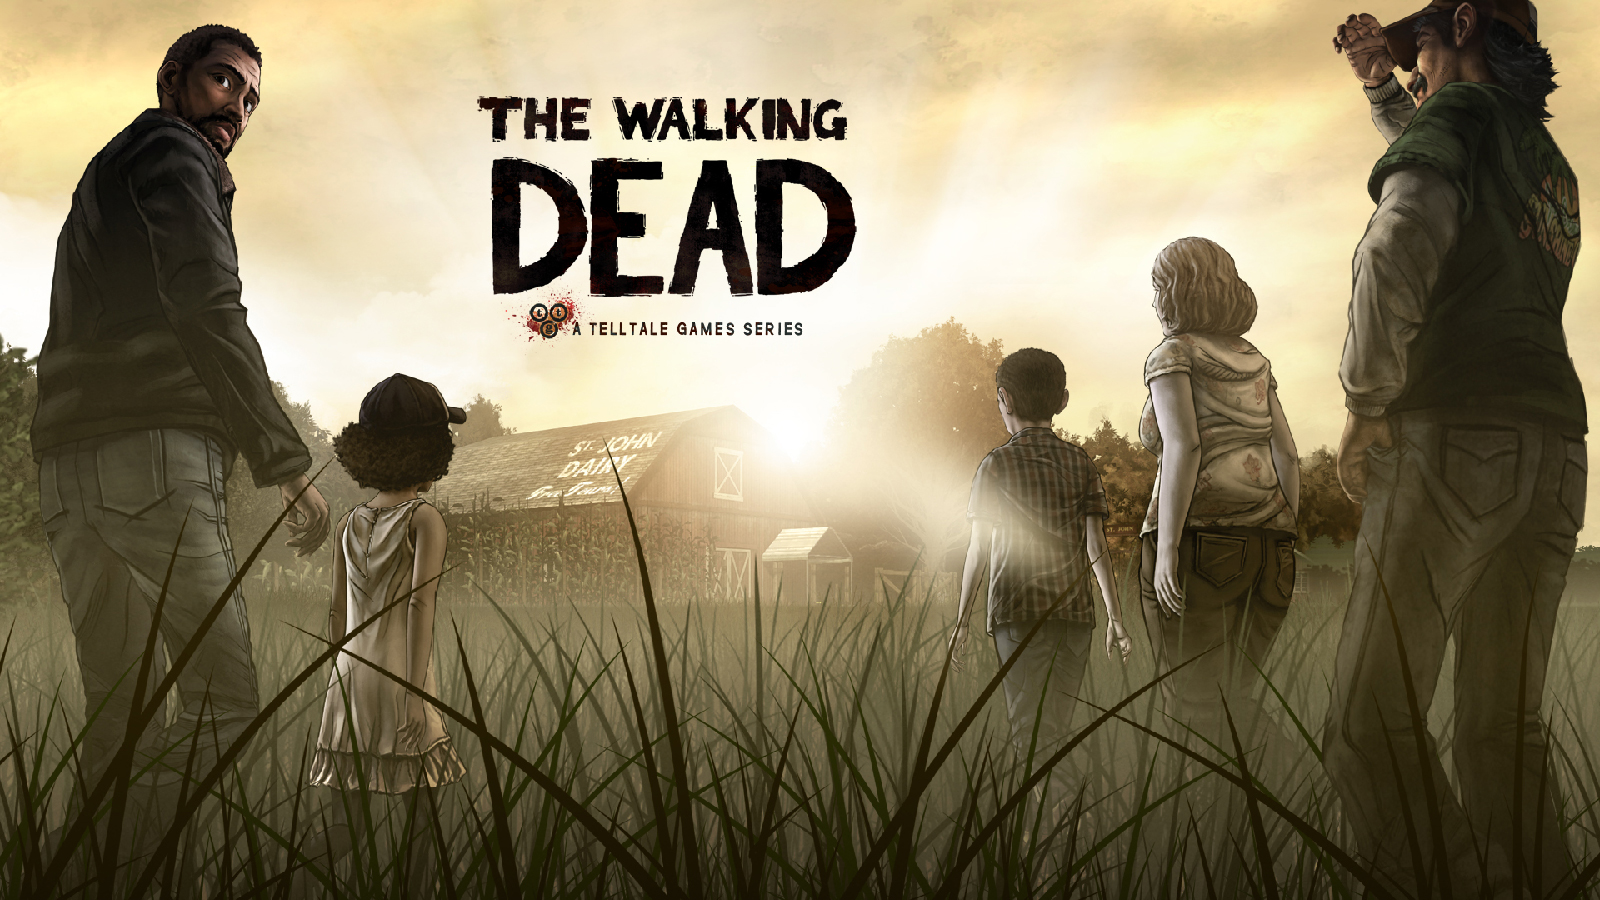 Image for Jelly Deals: Walking Dead Season One is free on PC today